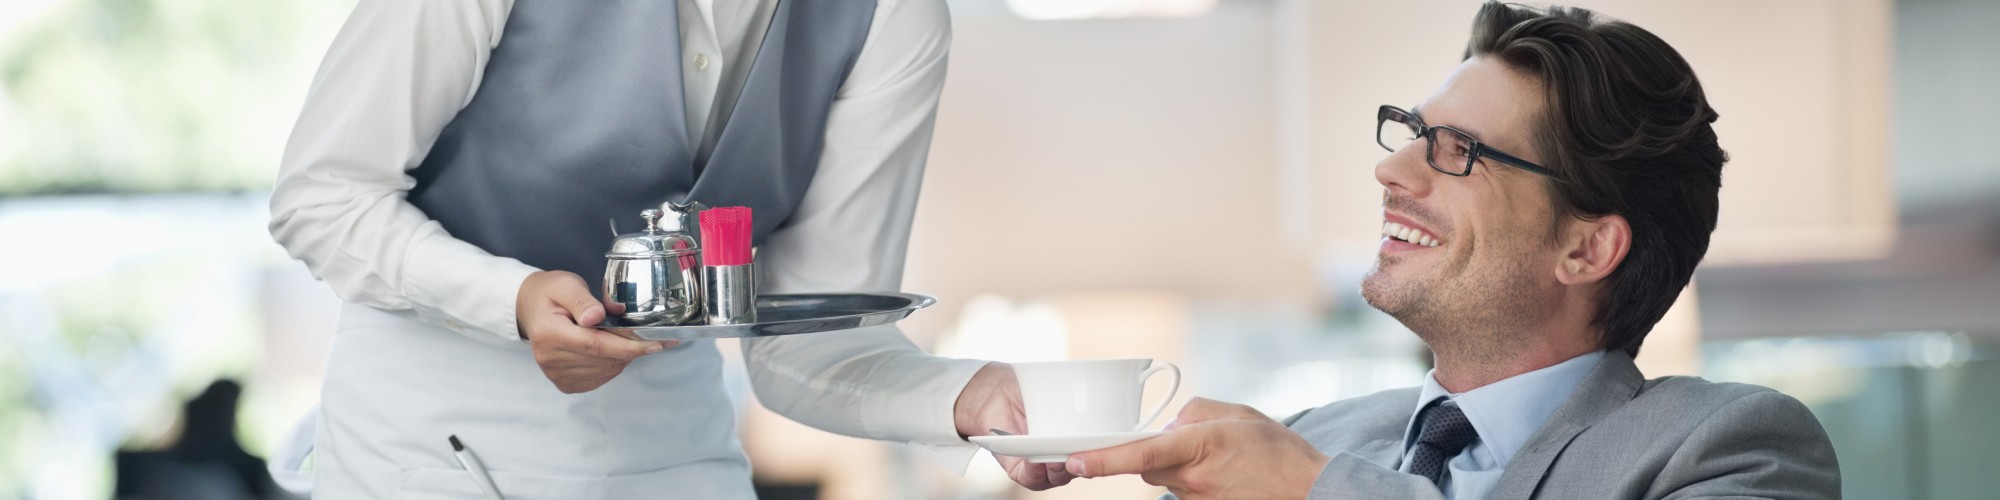 Waitress serving coffee to a business man